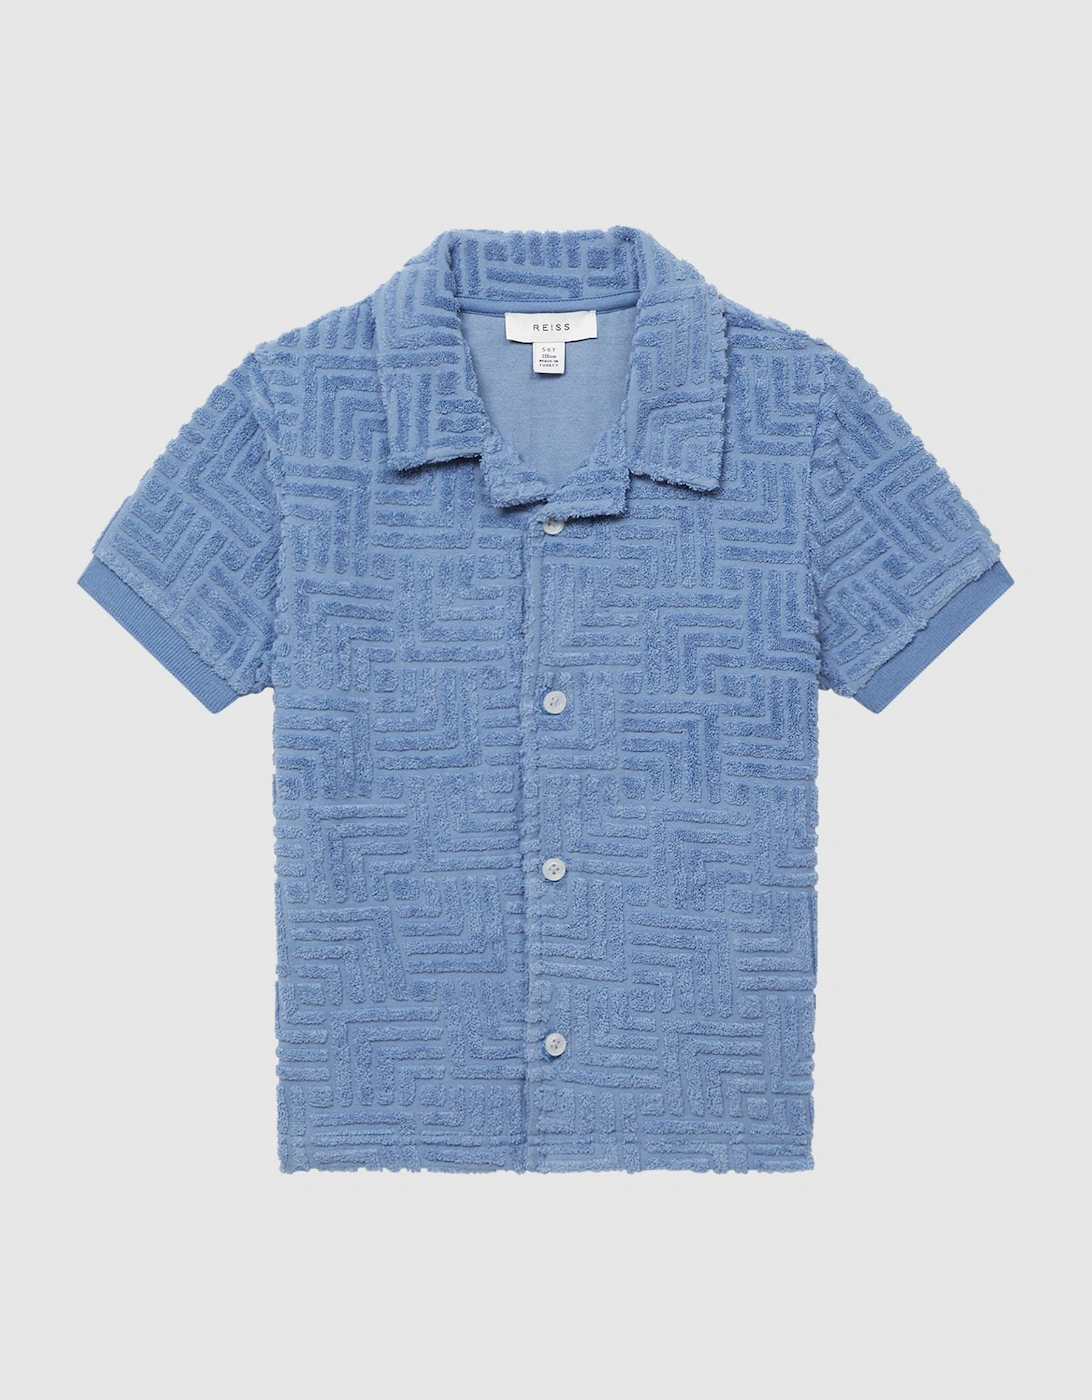 Terry Towelling Shirt